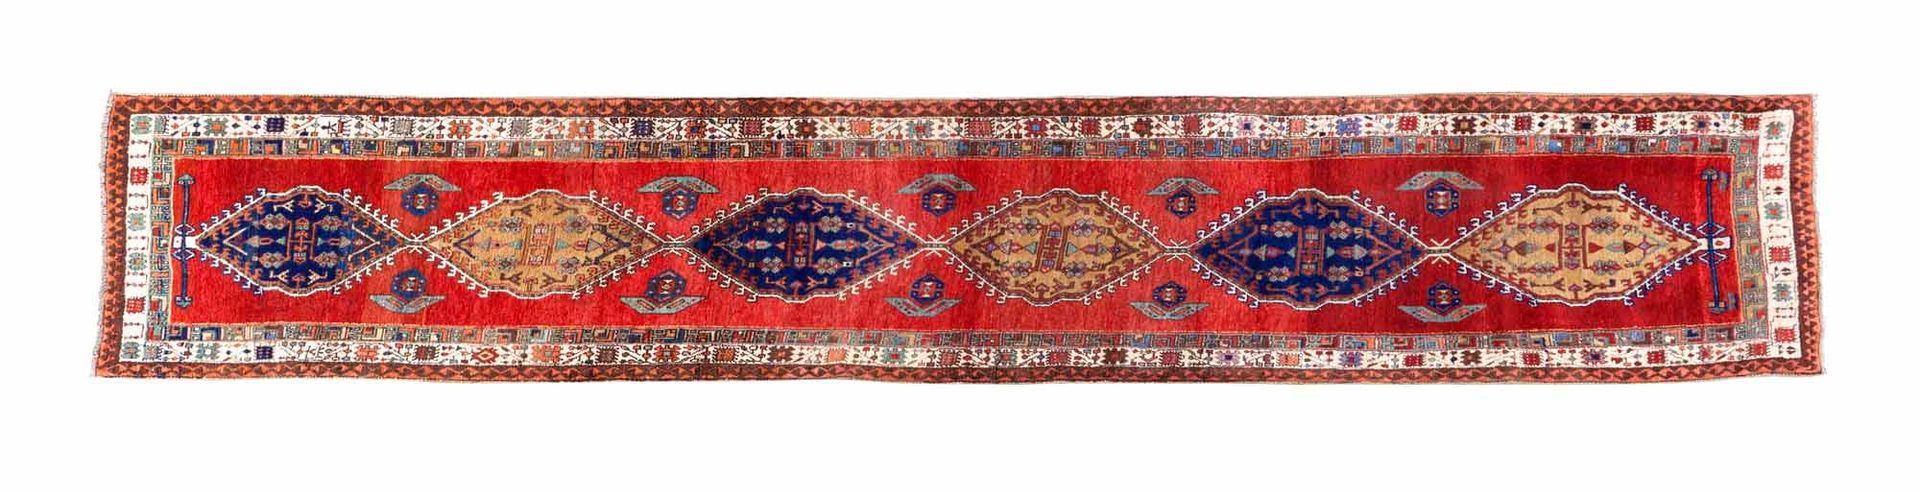 Null SARAB gallery carpet (Persia), 1st third of the 20th century

Dimensions : &hellip;